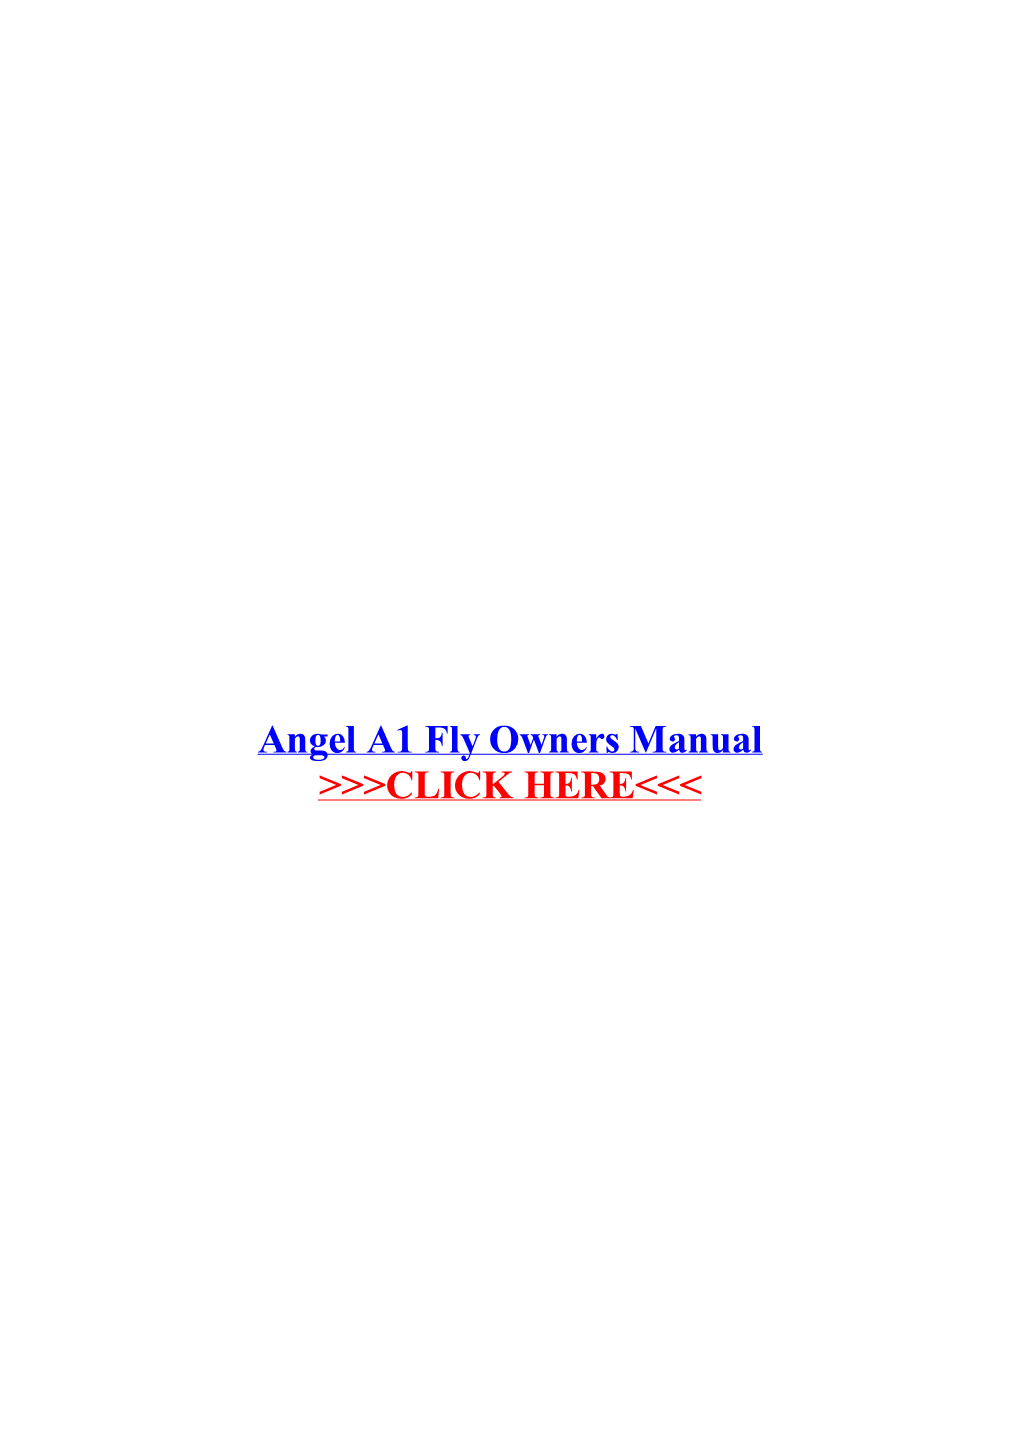 Angel A1 Fly Owners Manual